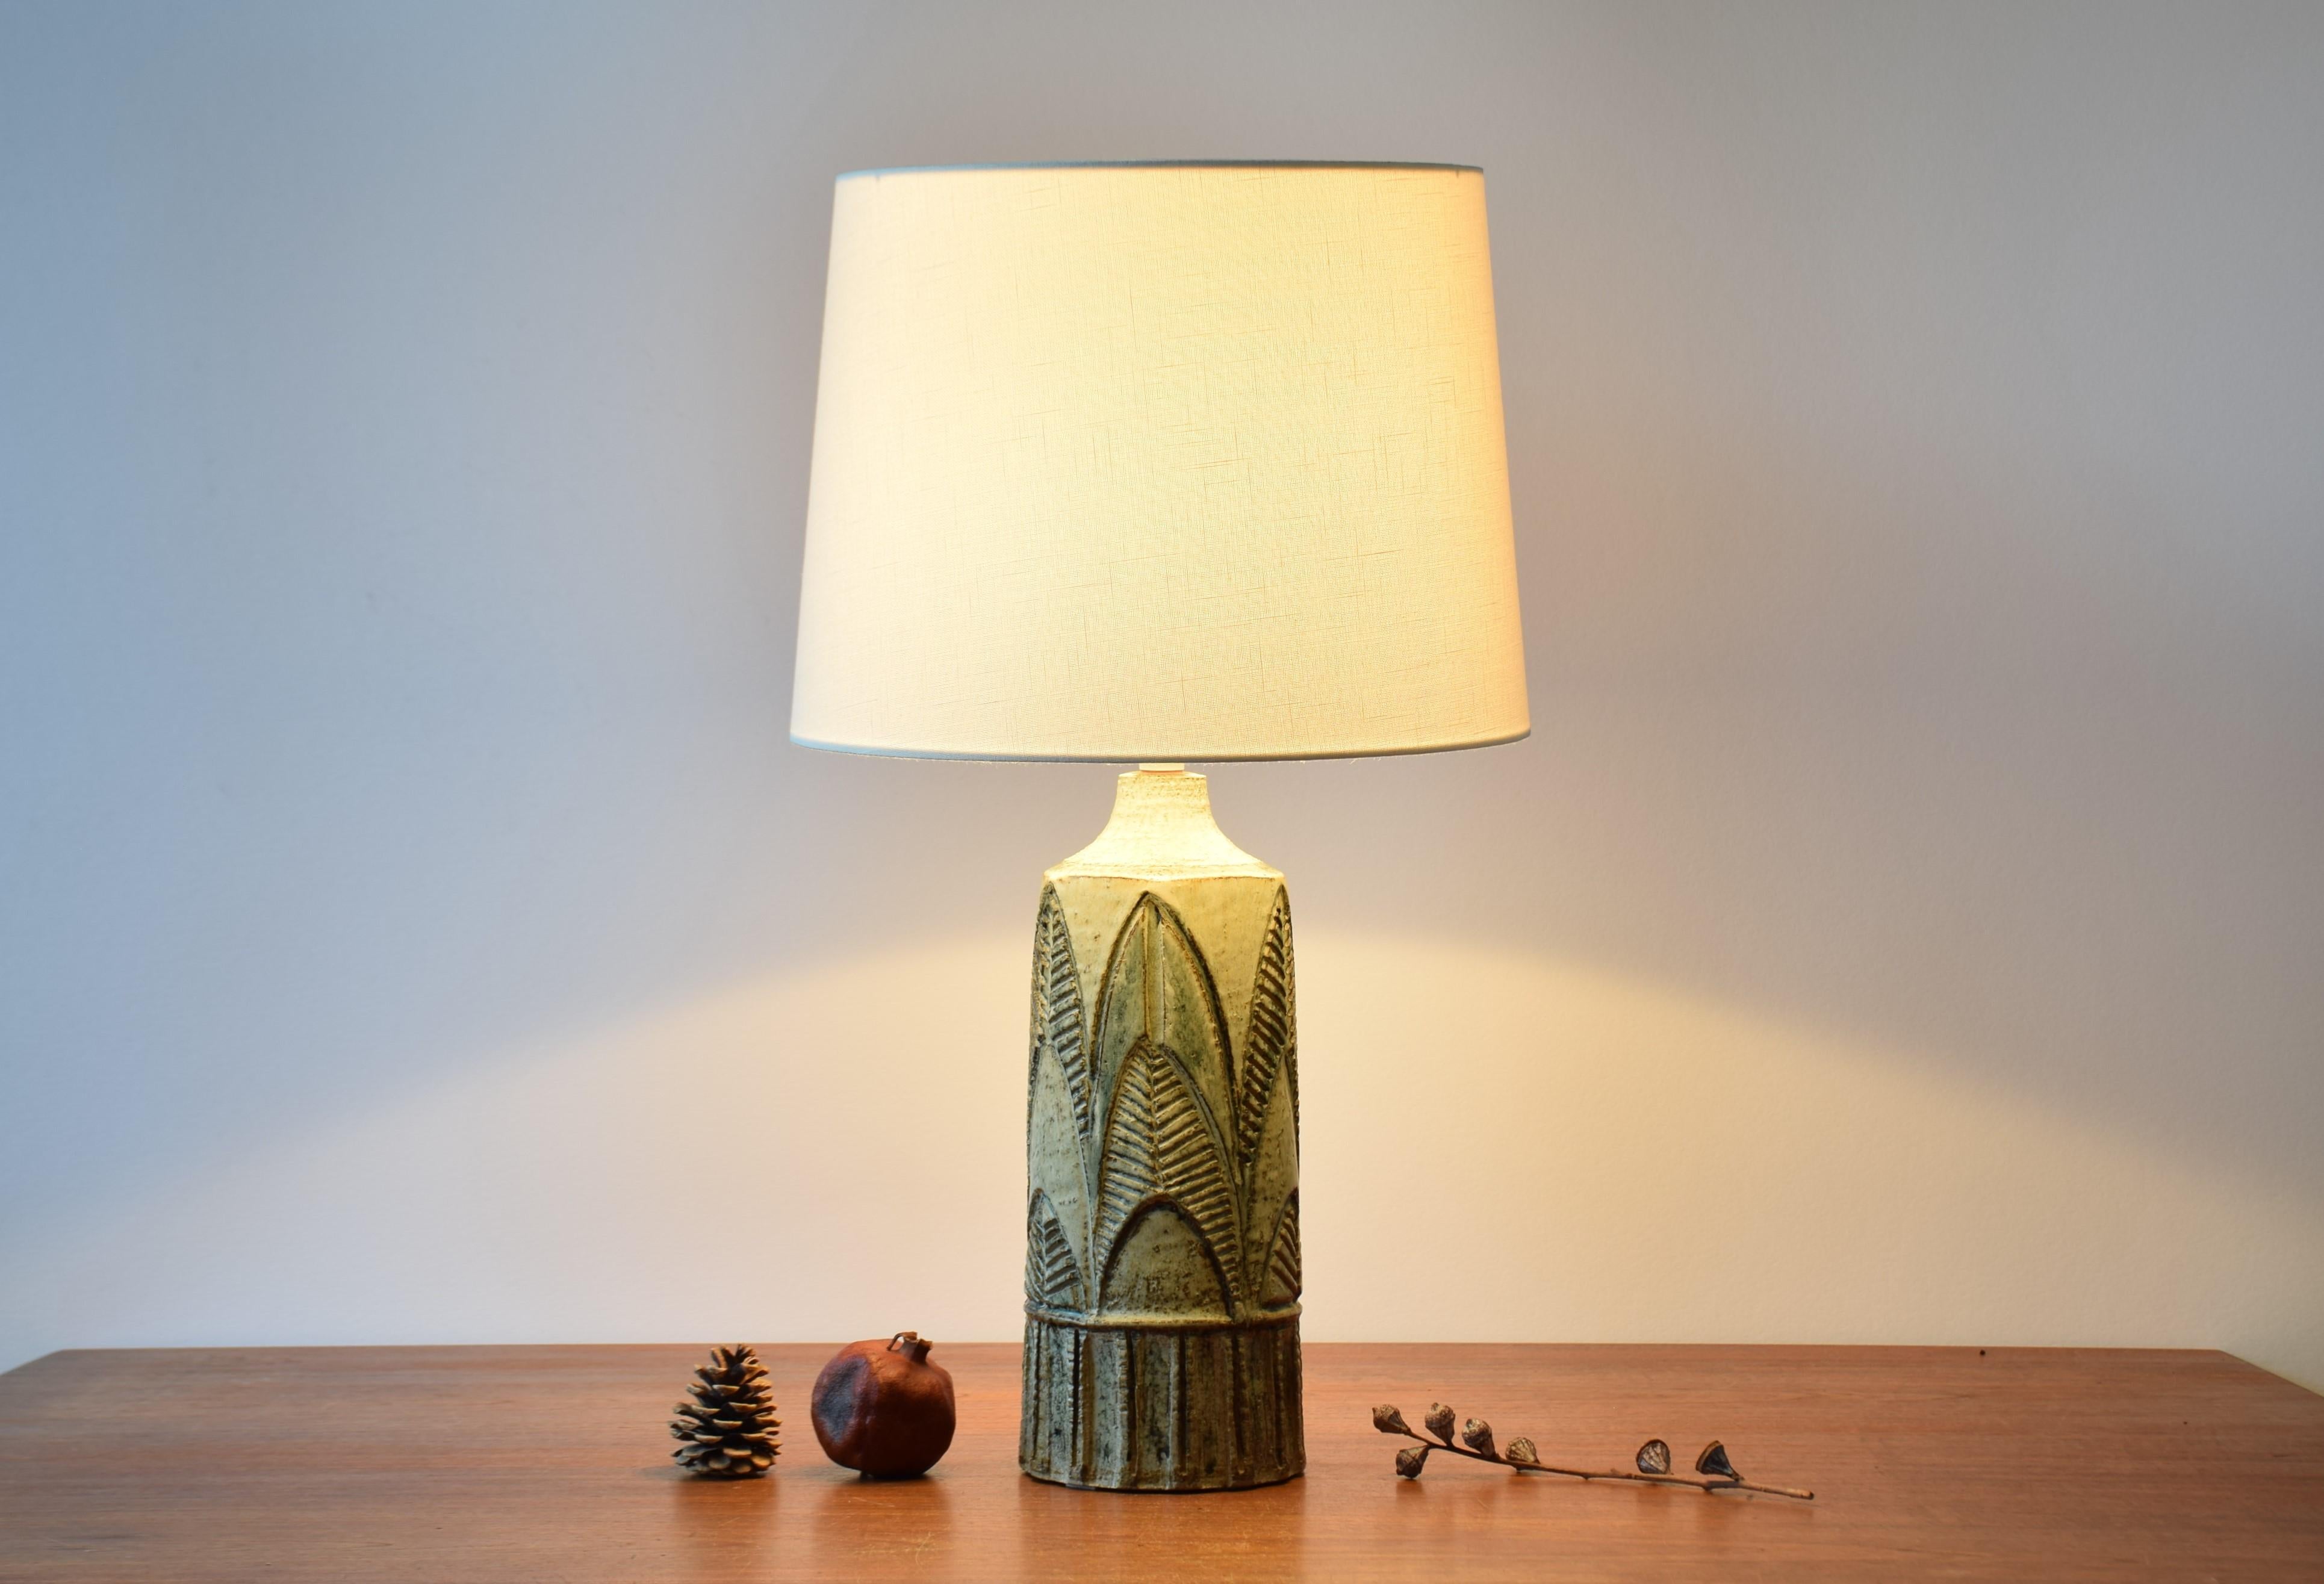 Tall and unique table lamp by Noomi Backhausen for Danish stoneware manufacturer Søholm.
Made ca 1960s.

The lamp shows a stylized leaf or tree motifs in relief and is covered with glaze in greenish and brown nature-like colors. The structured